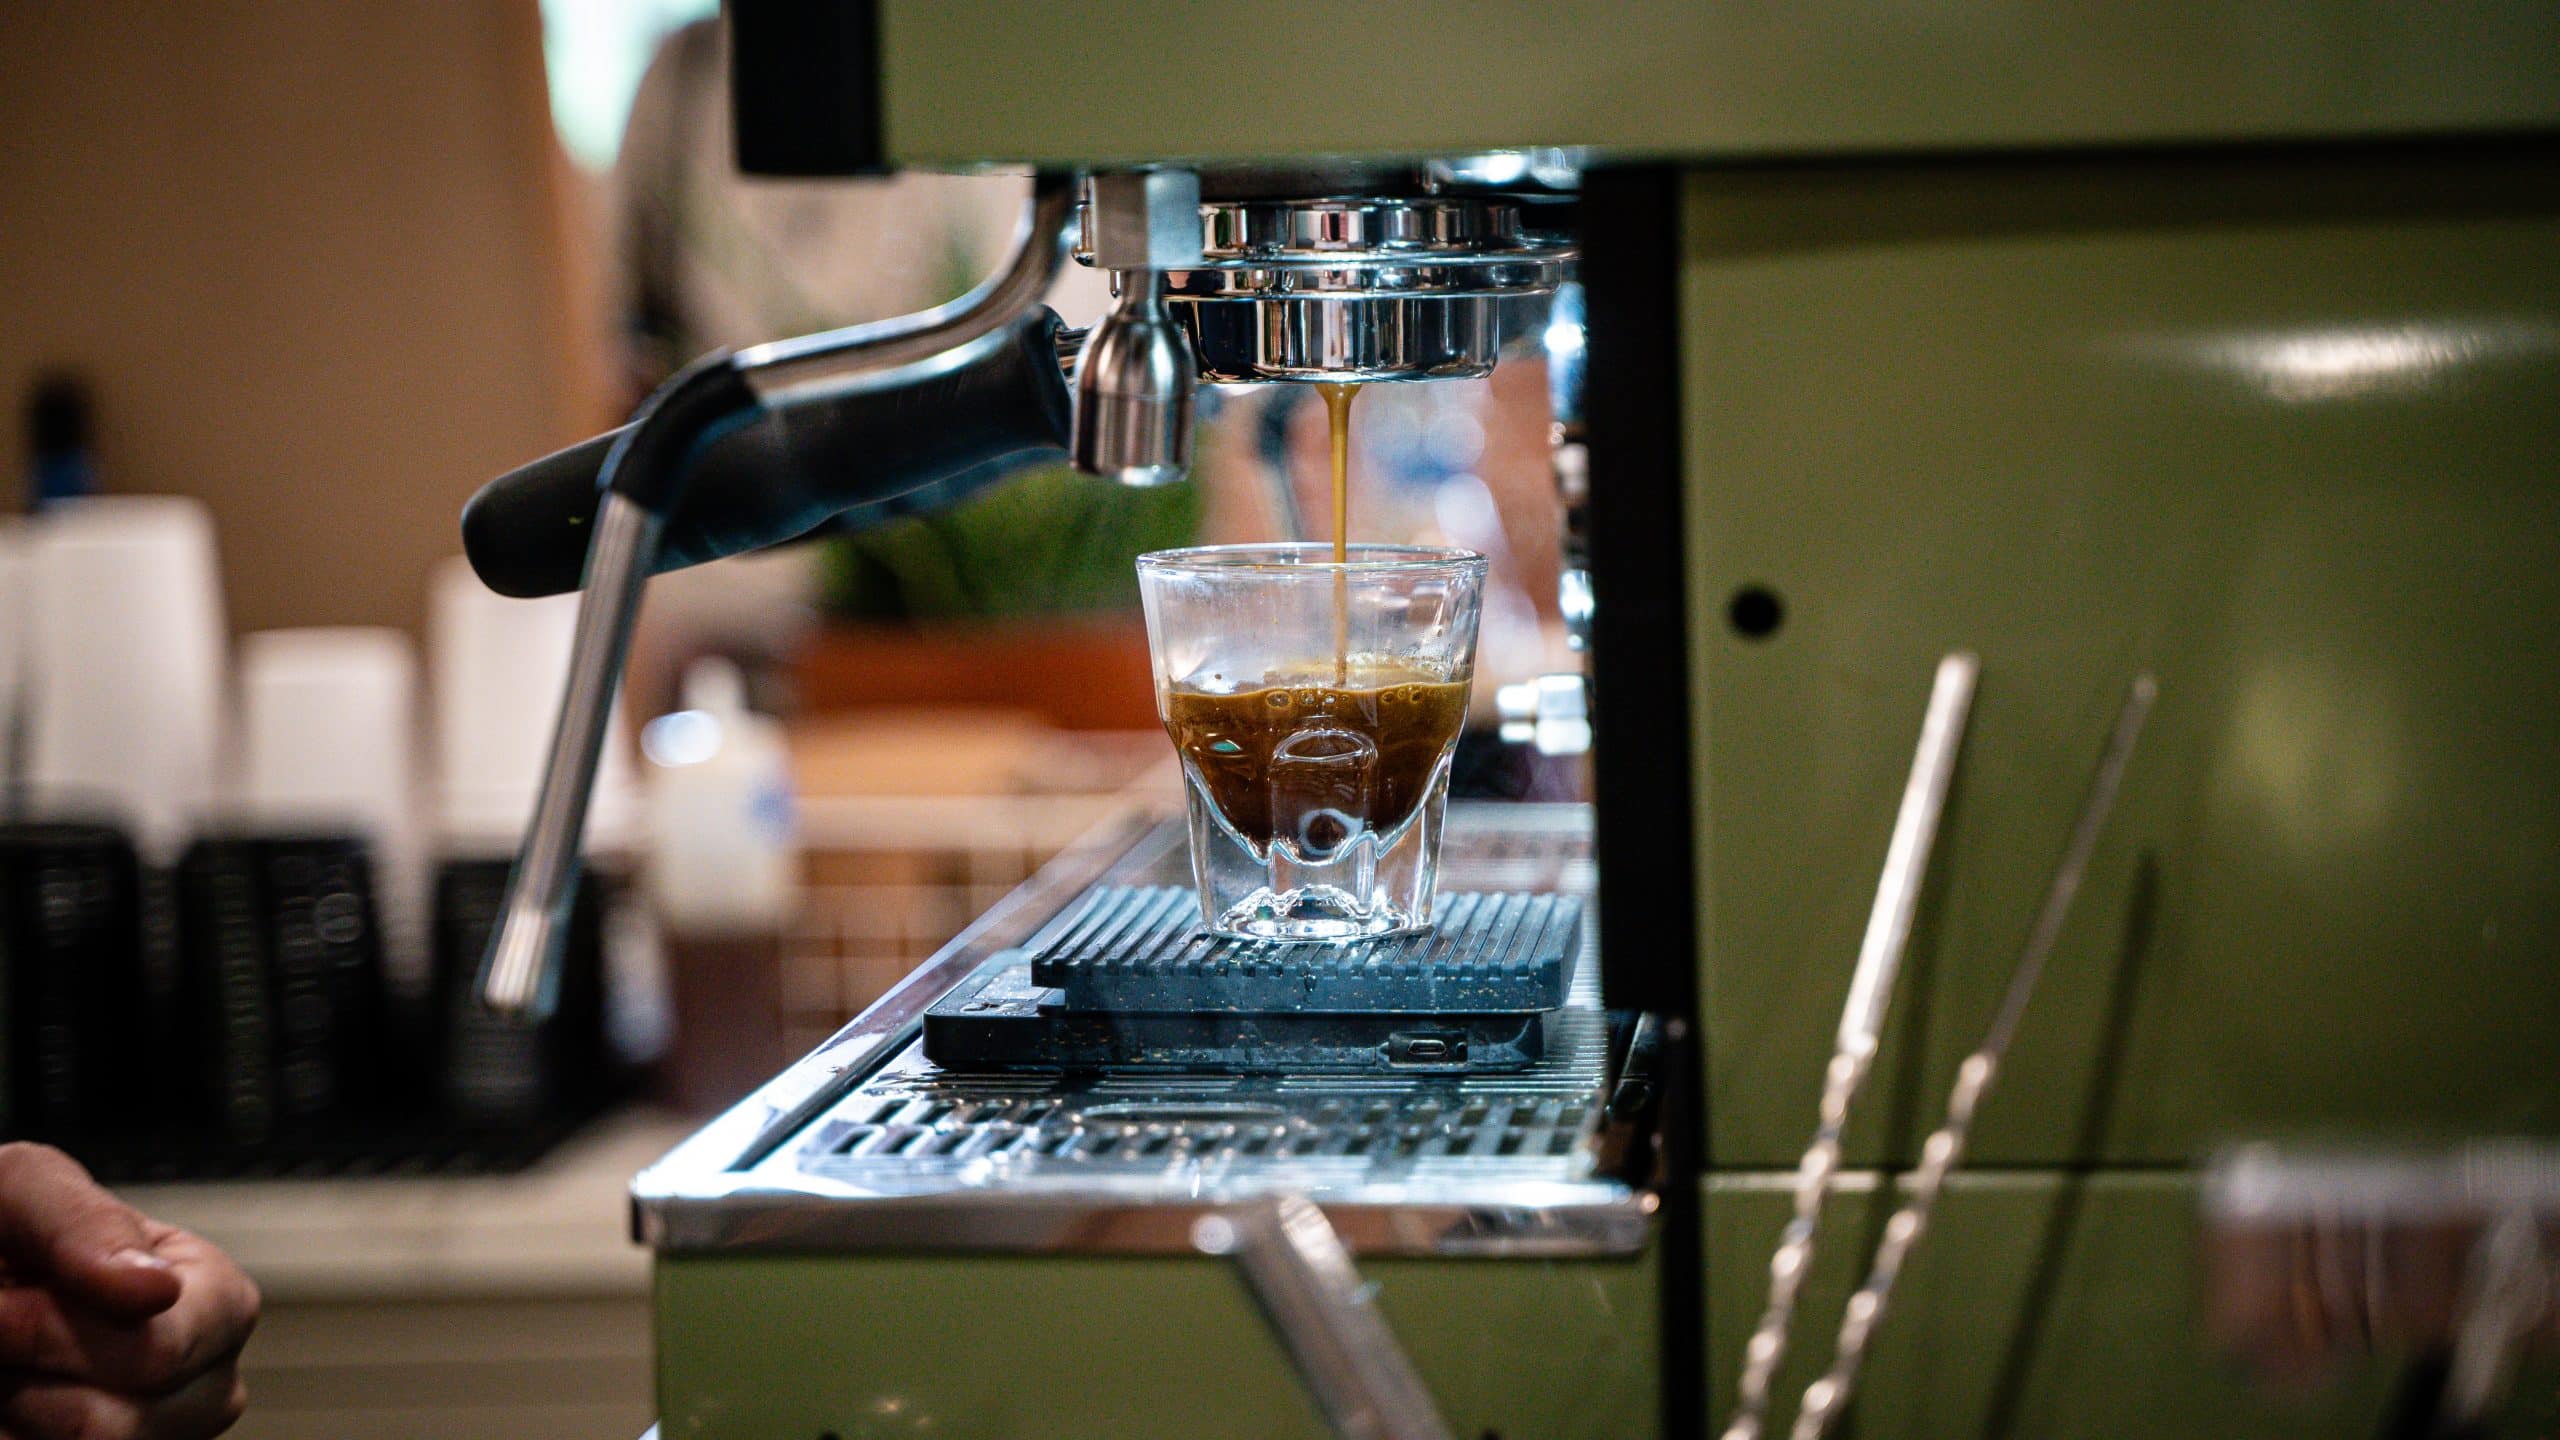 Espresso bars and bottomless drip coffee